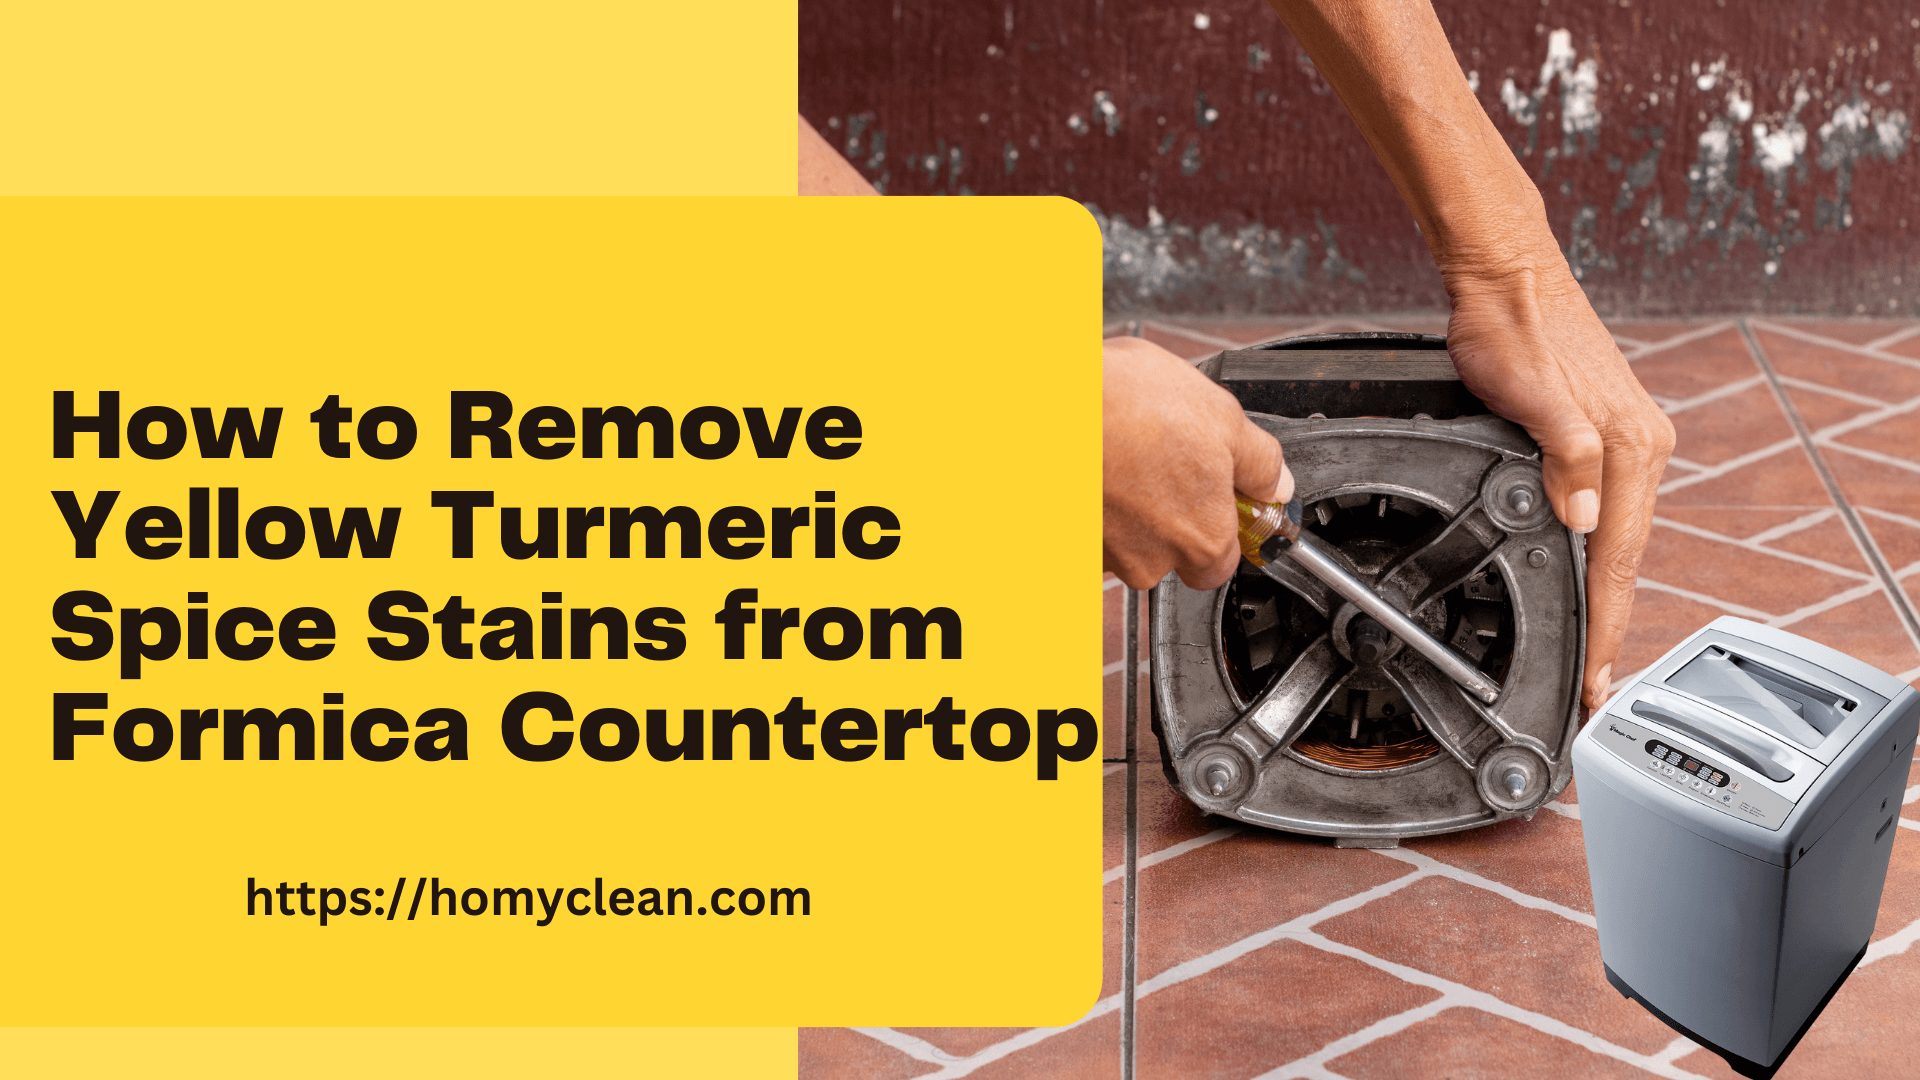 How to Remove Yellow Turmeric Spice Stains from Formica Countertop (6 Methods)